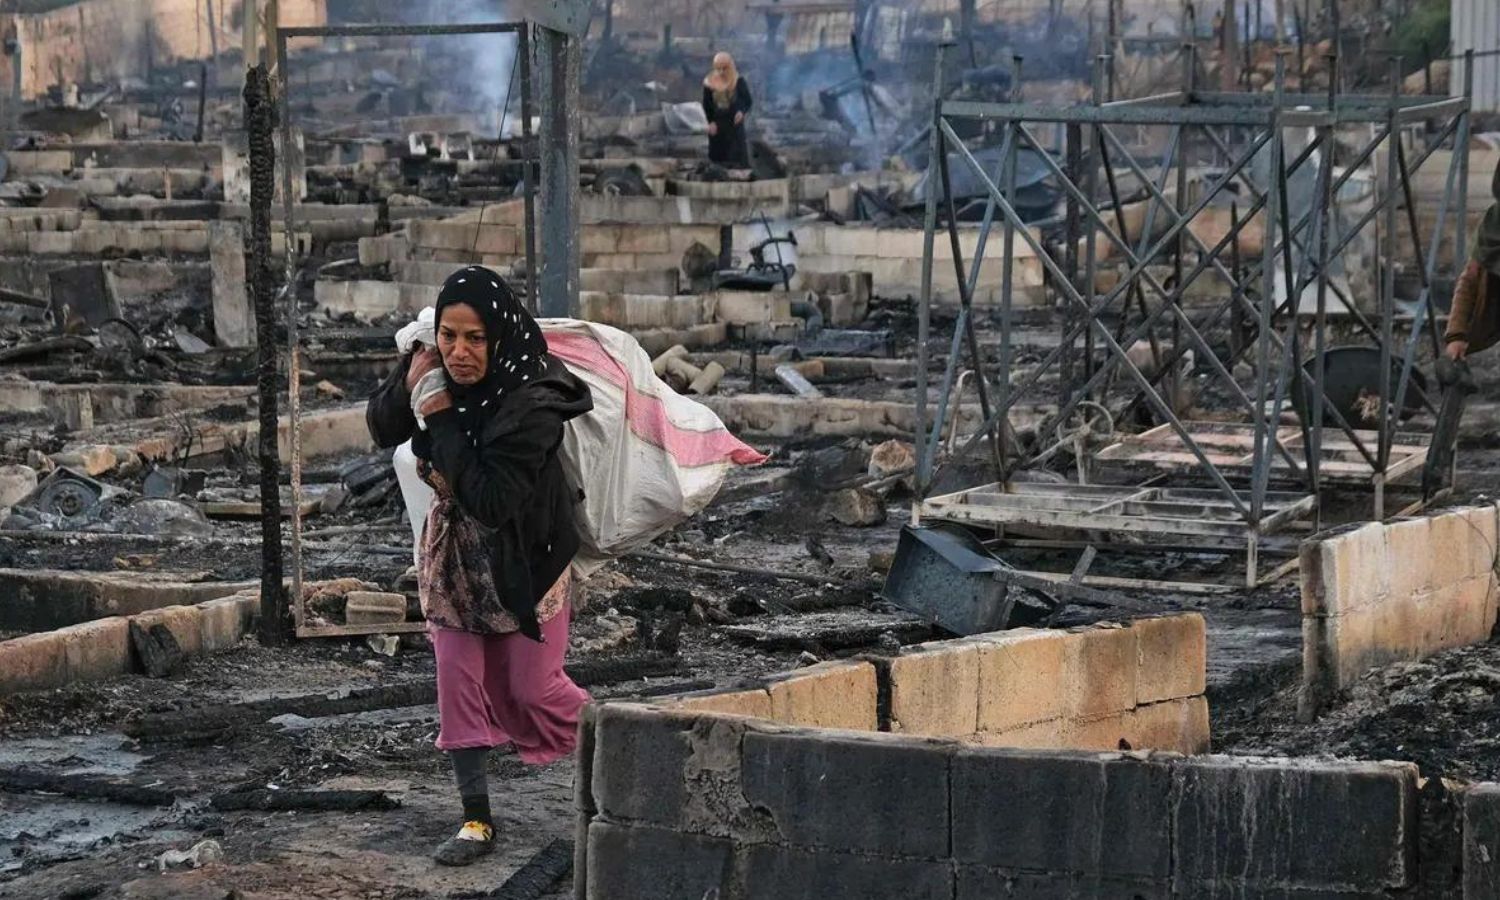 Syrian refugees retrieve their belongings from a camp that was set on fire in the town of Behnin in northern Lebanon - 27 December 2020 (AFP)